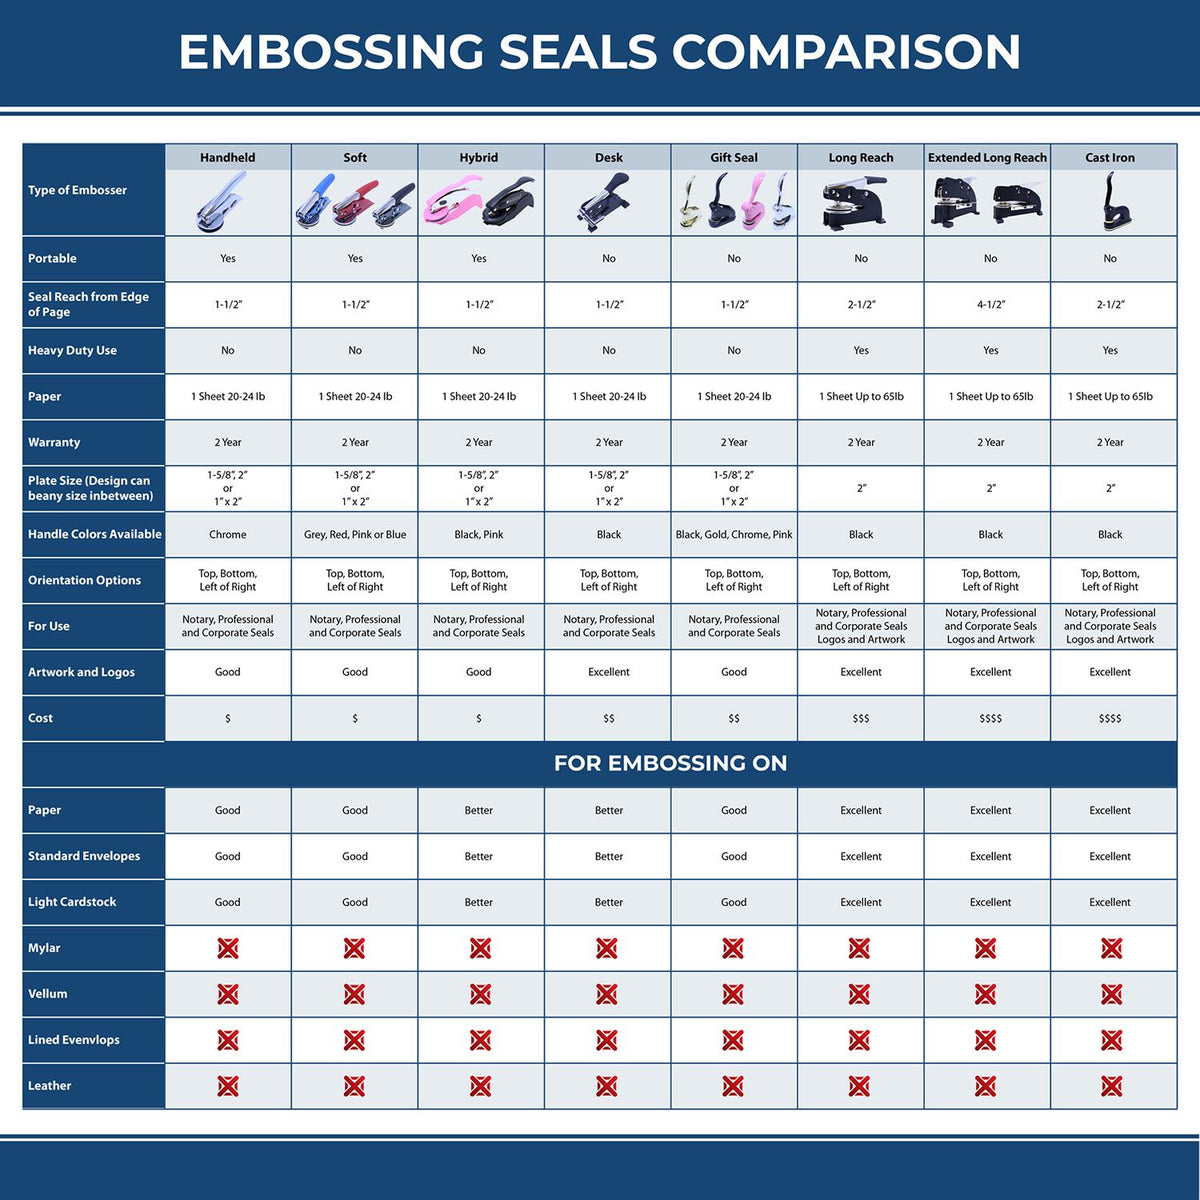 A comparison chart for the different types of mount models available for the Handheld Connecticut Architect Seal Embosser.